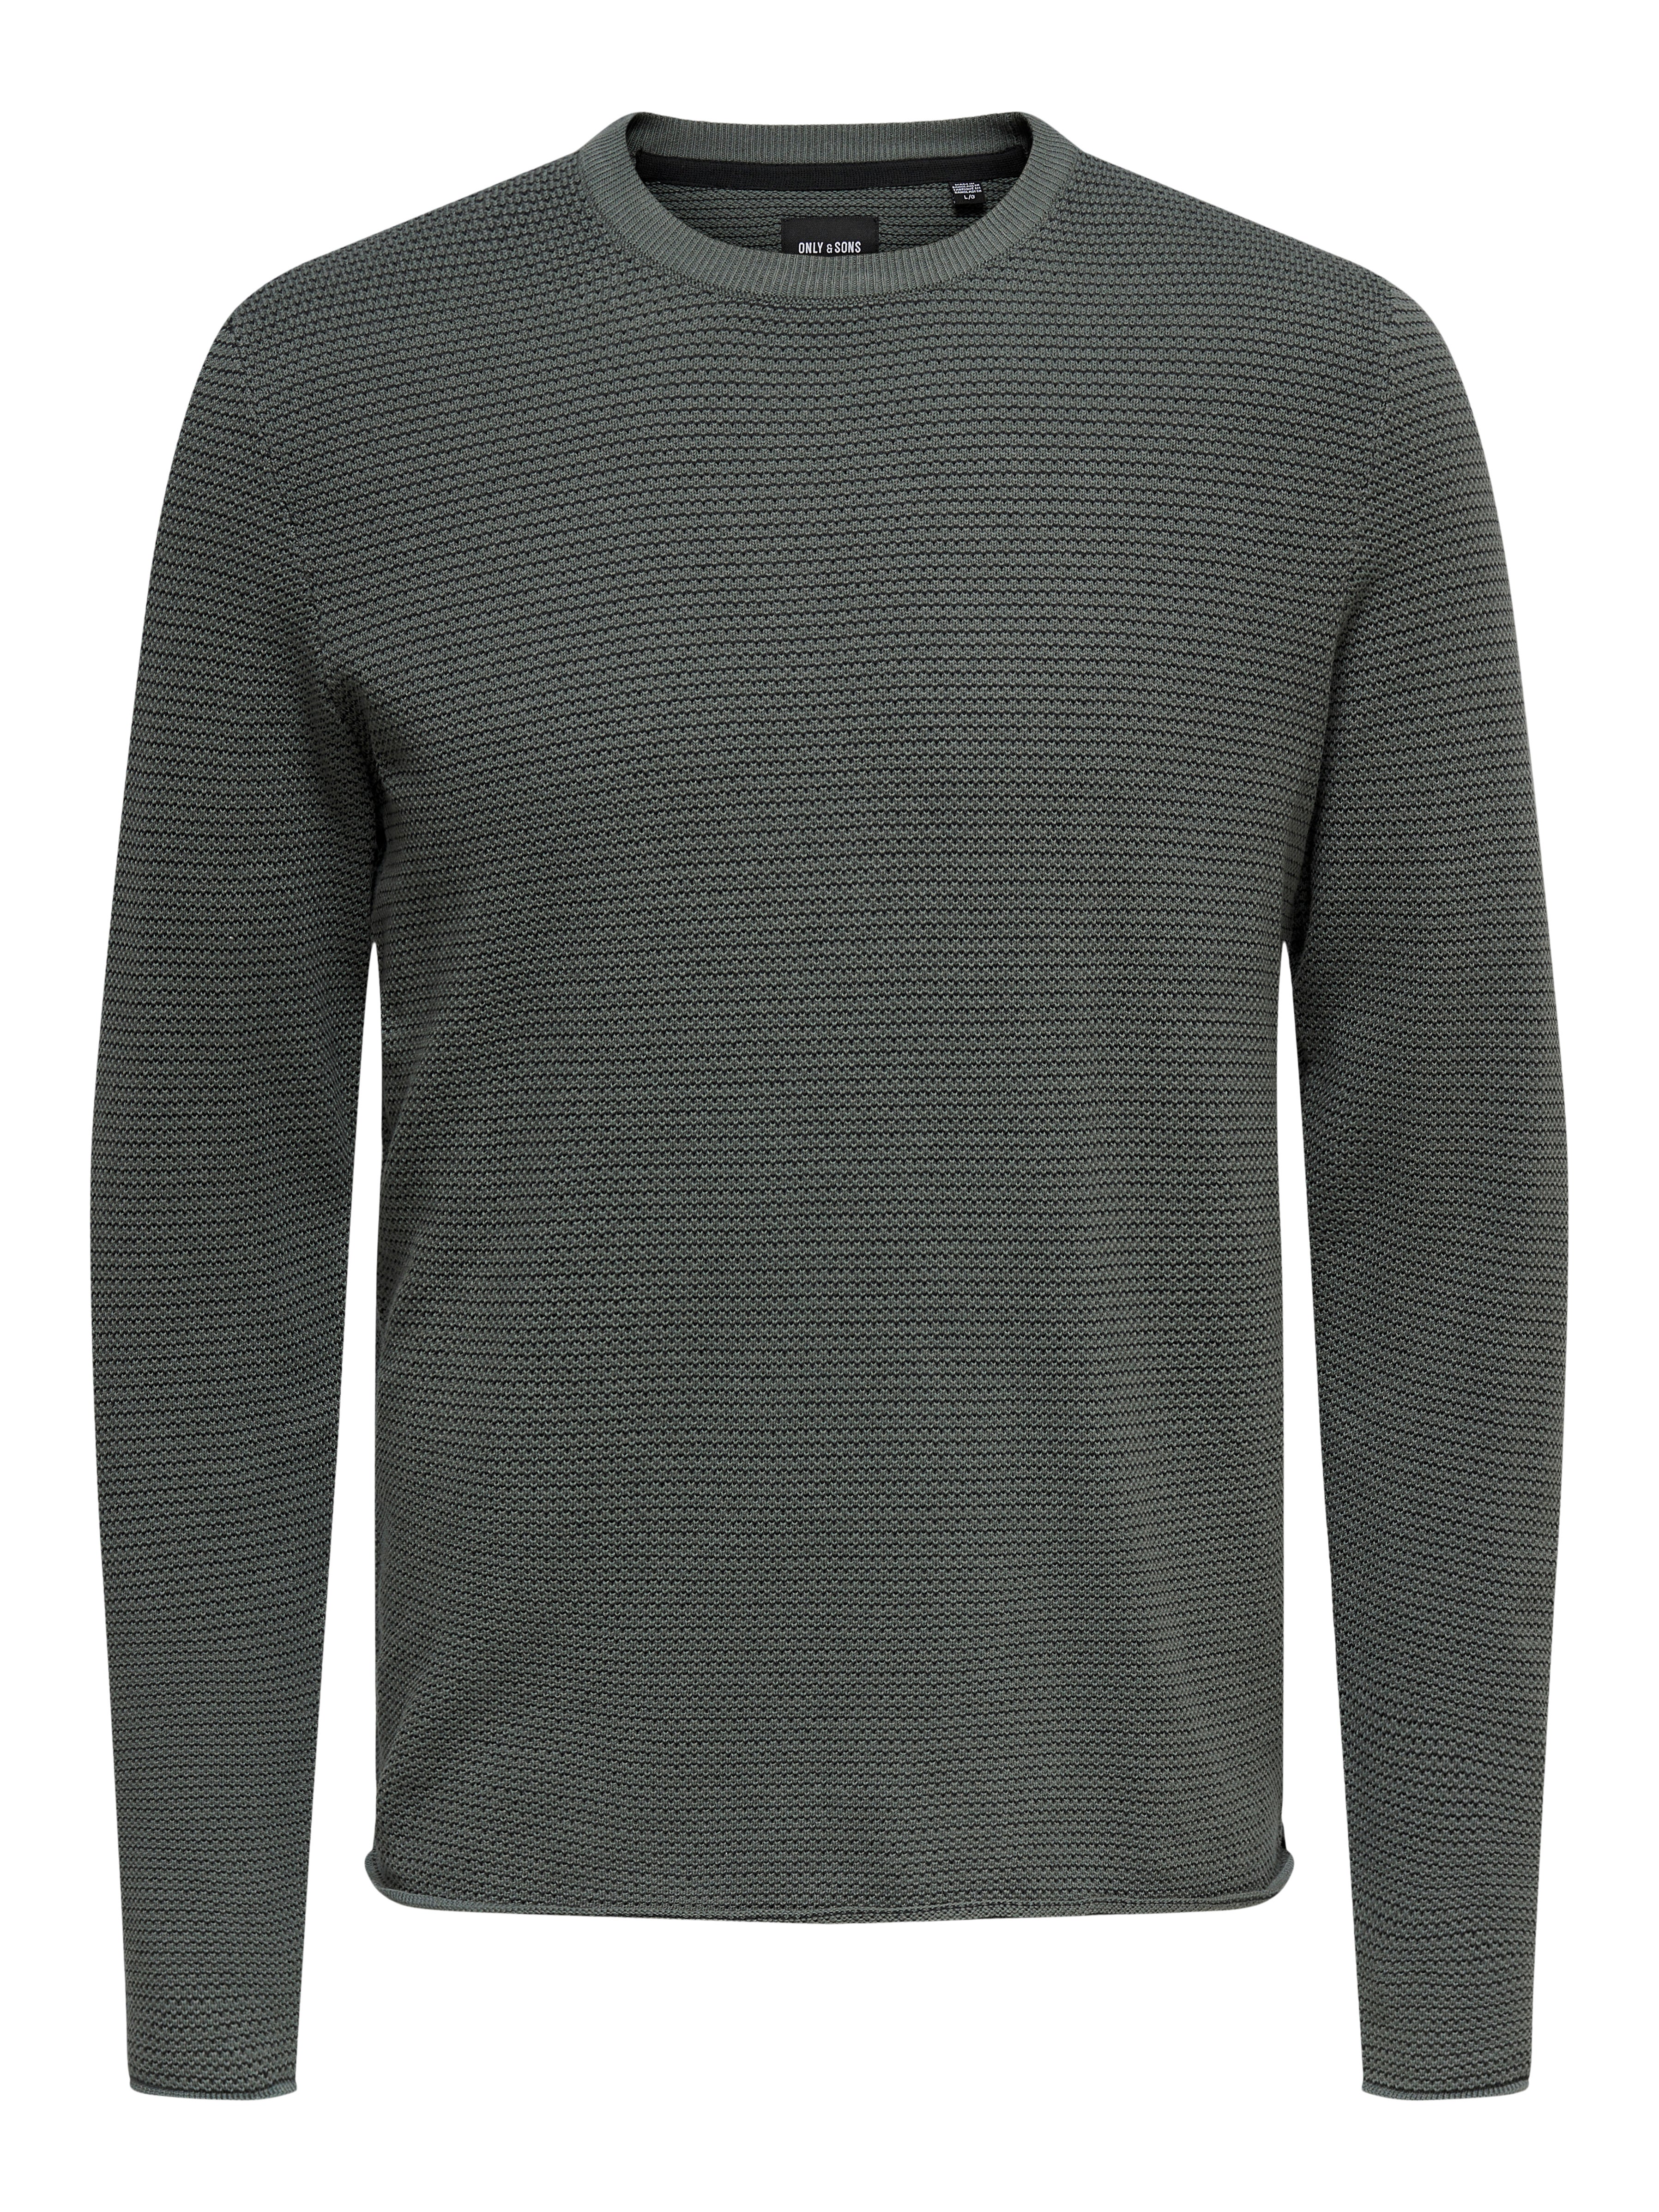 Agana Men Casual Round Neck Loose Fit Knitted Pullover Color Block Sweater